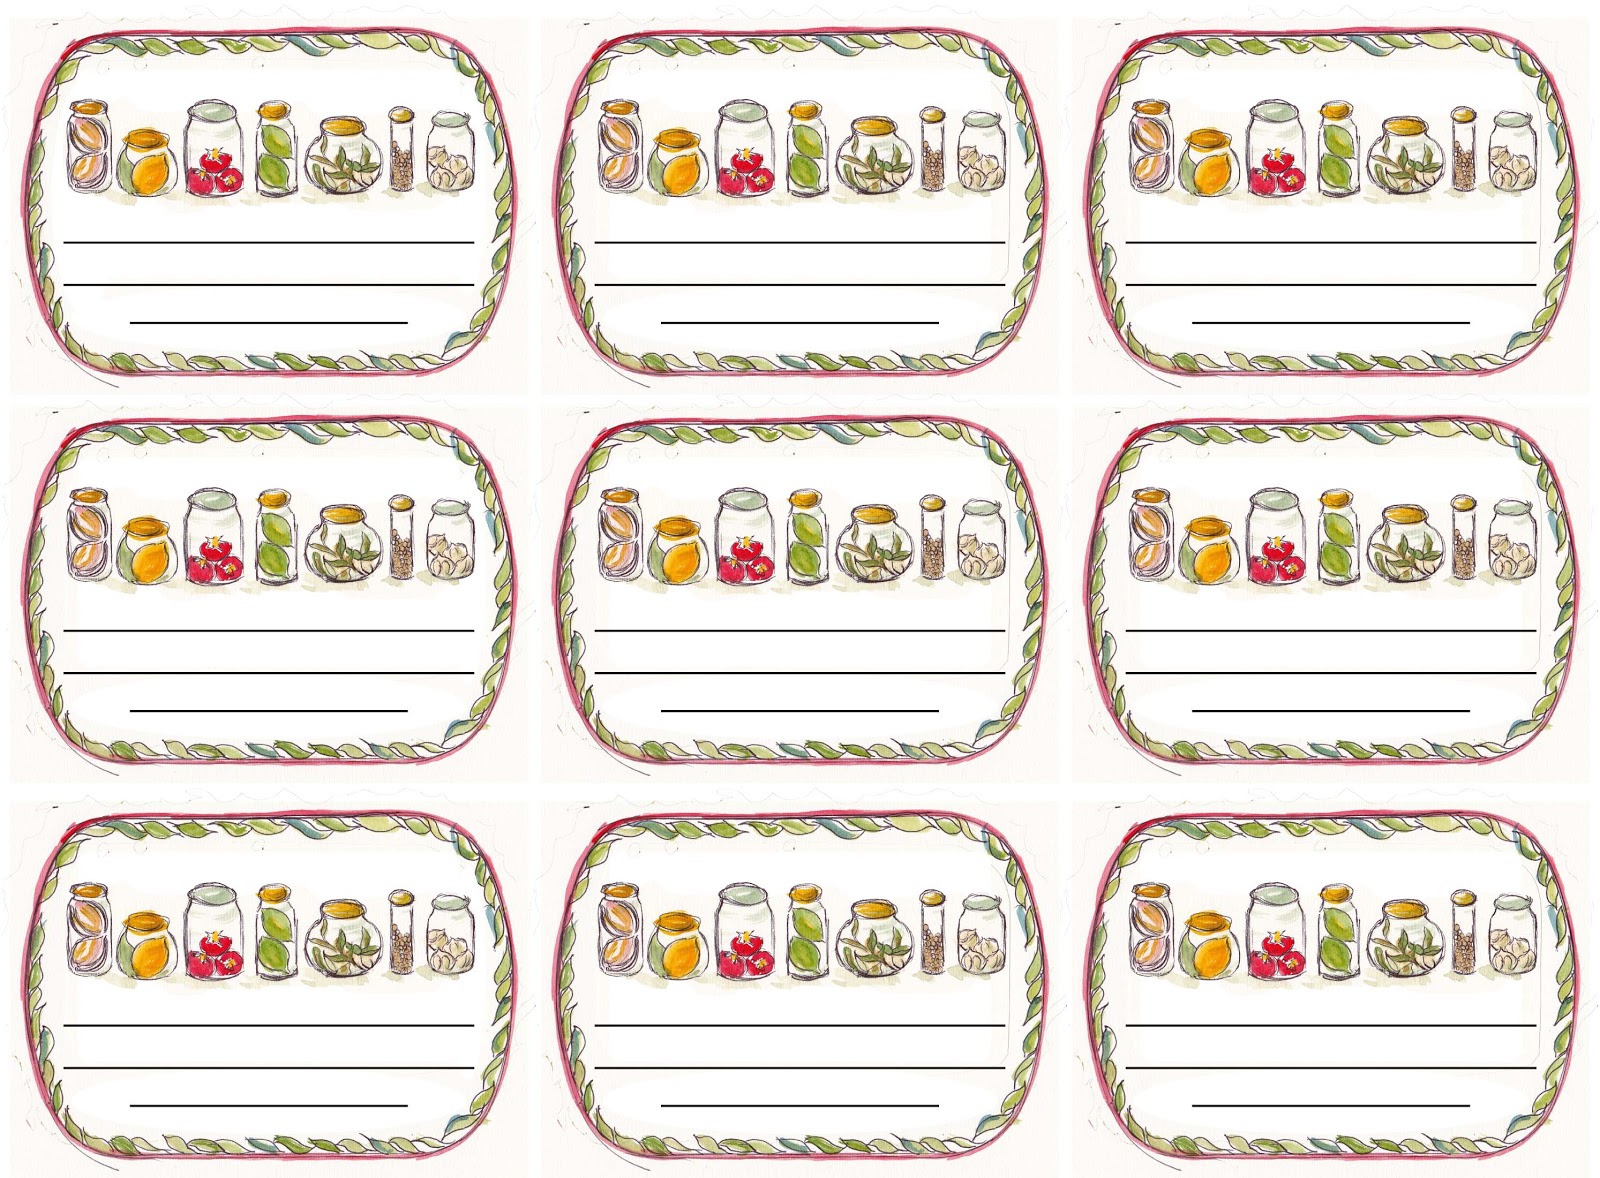 100th Day Cookie Label Free Printable